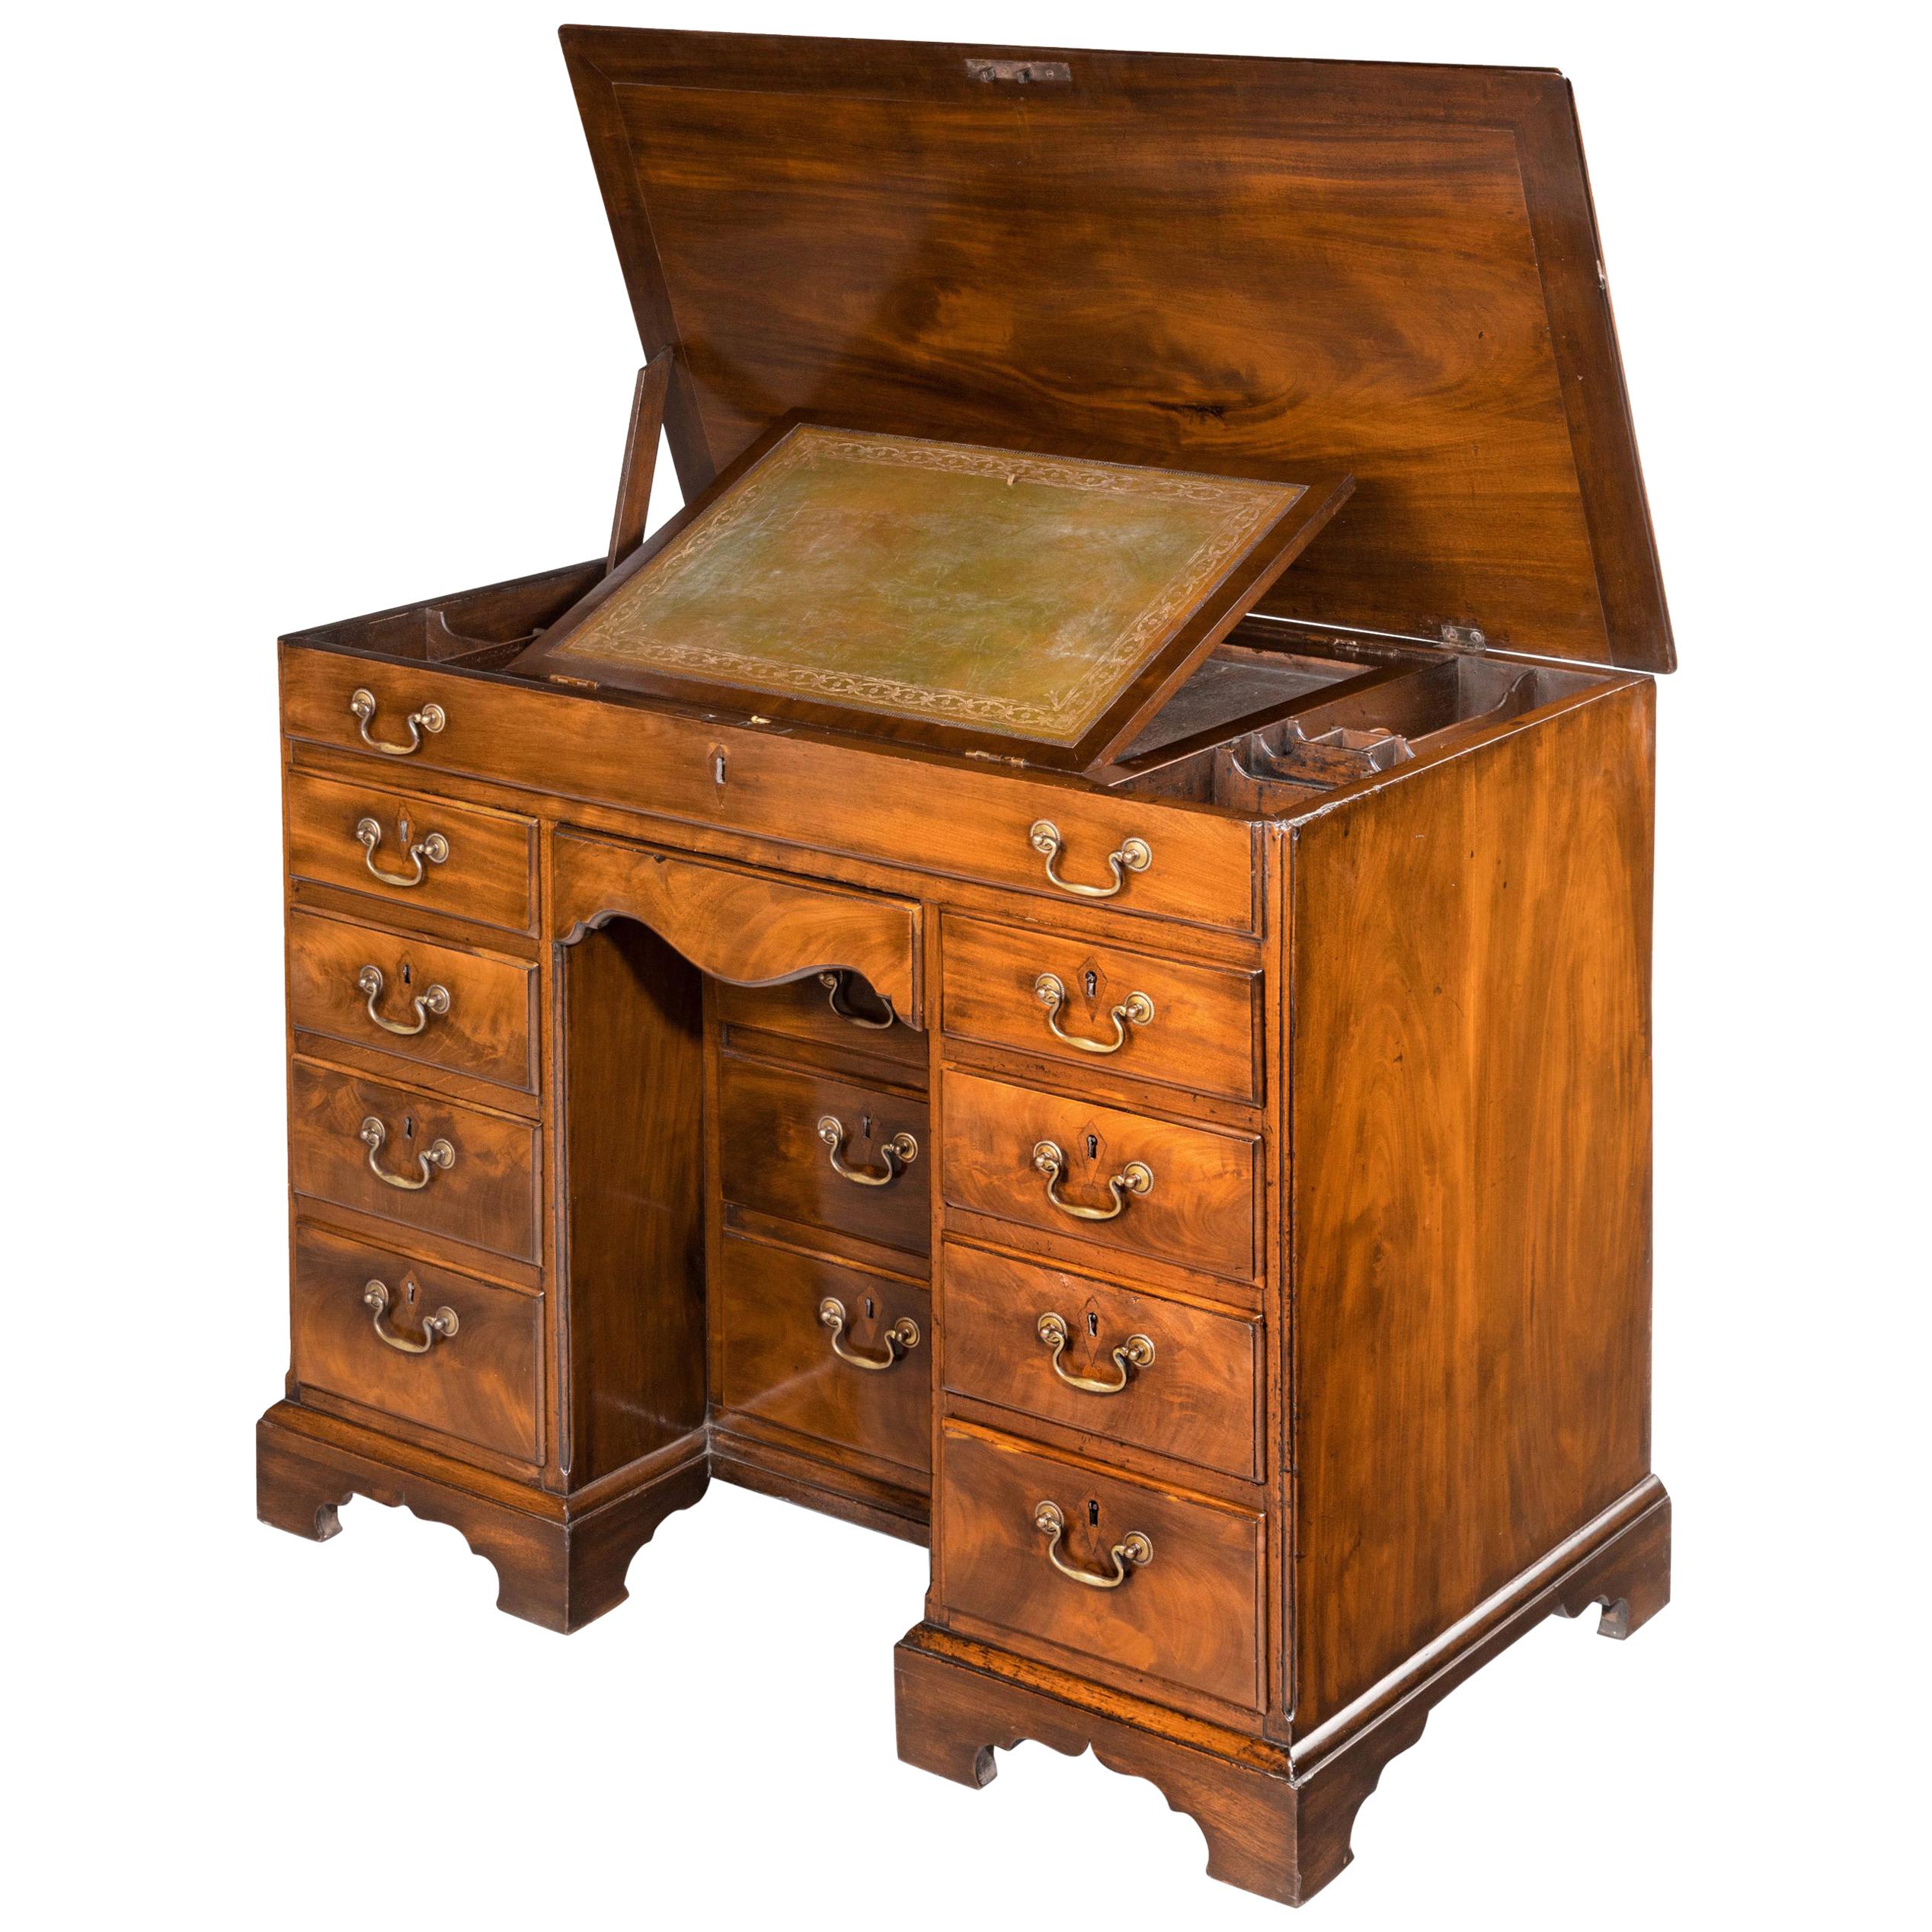 Chippendale Period Kneehole Desk or Dressing Table